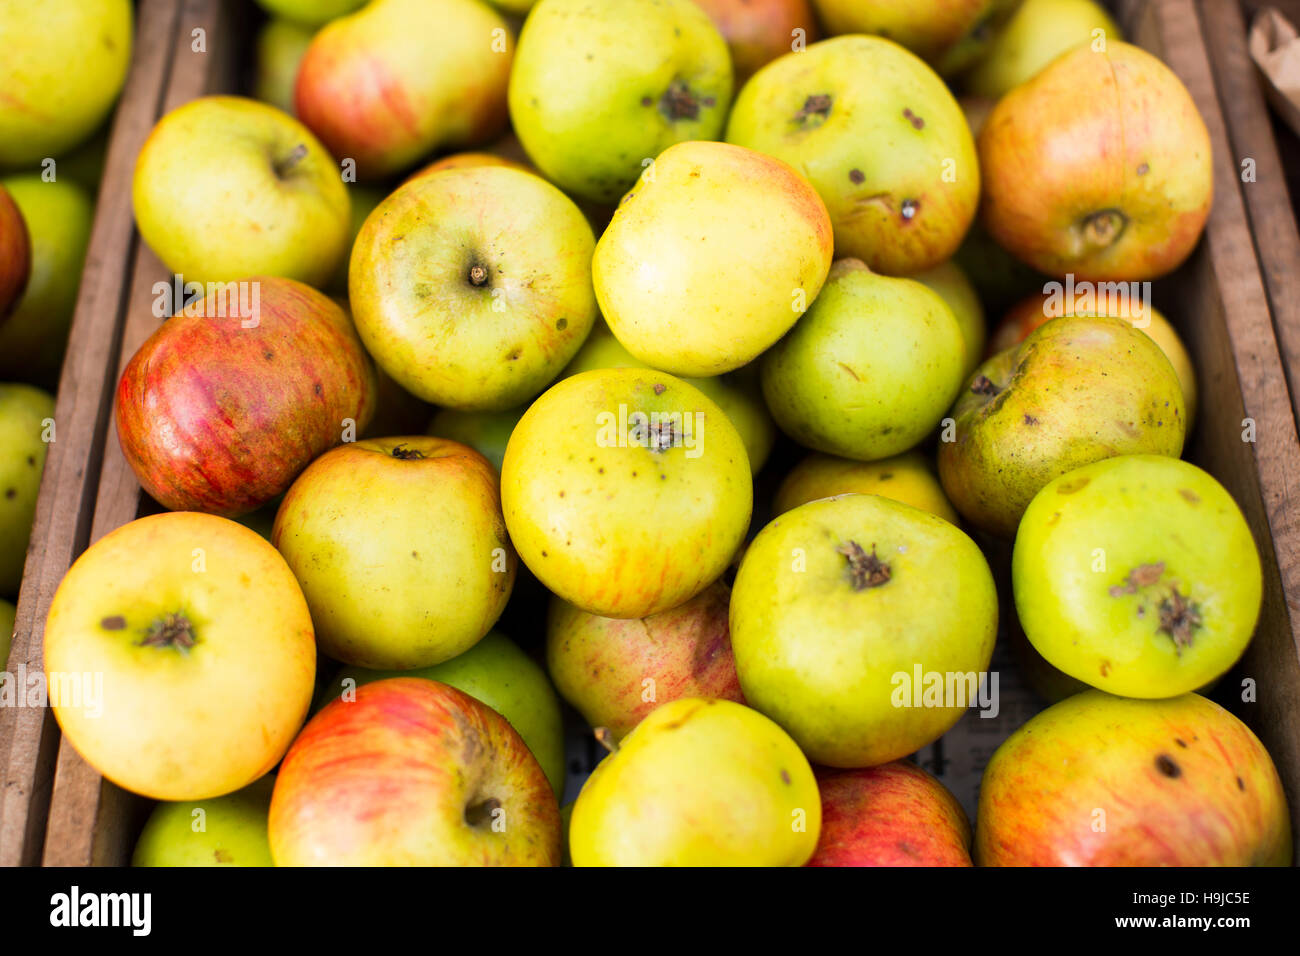 Rustic looking apples in a wooden crate in natural light. Stock Photo